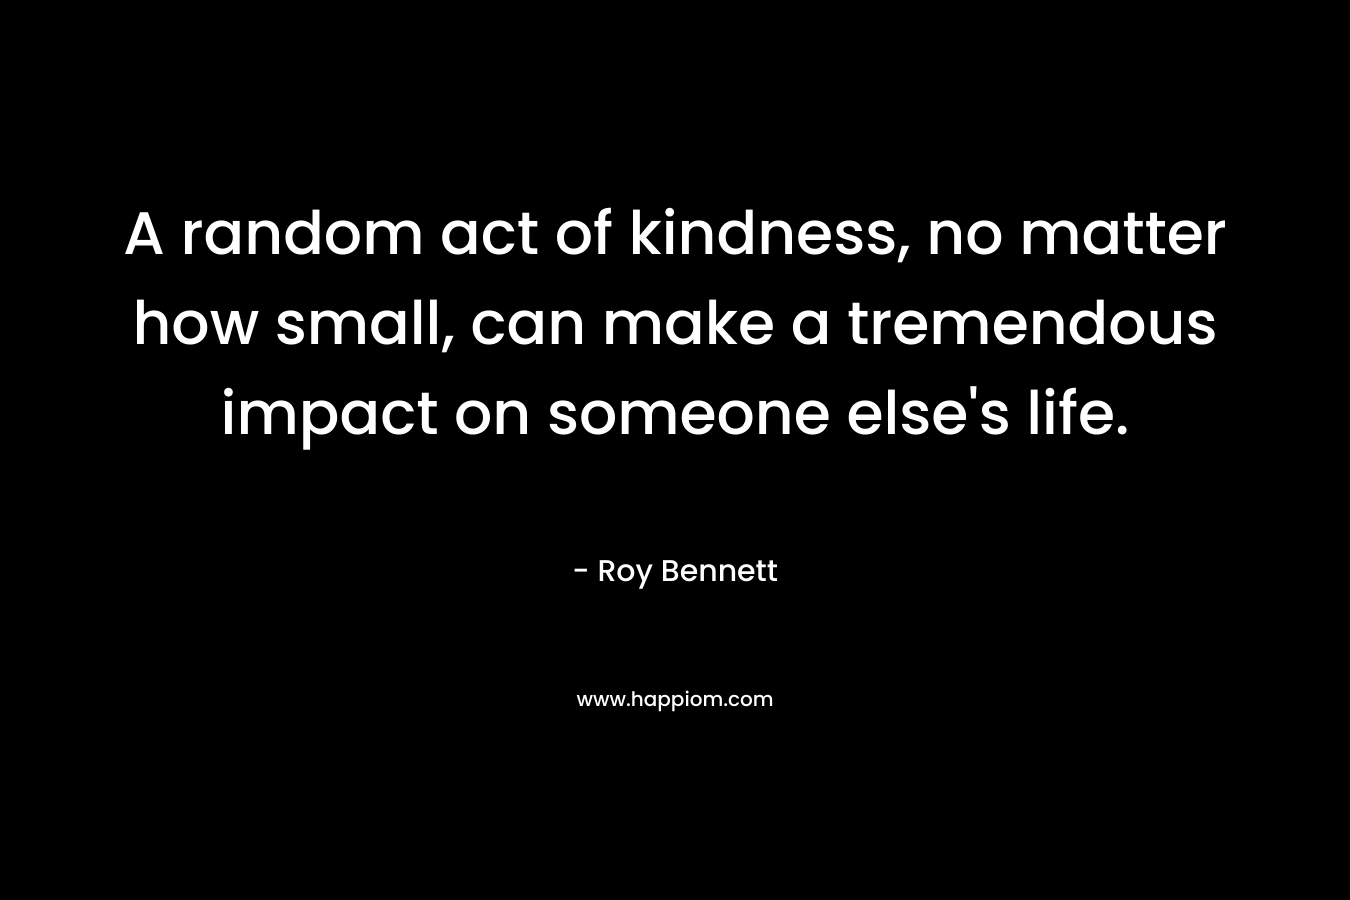 A random act of kindness, no matter how small, can make a tremendous impact on someone else's life.